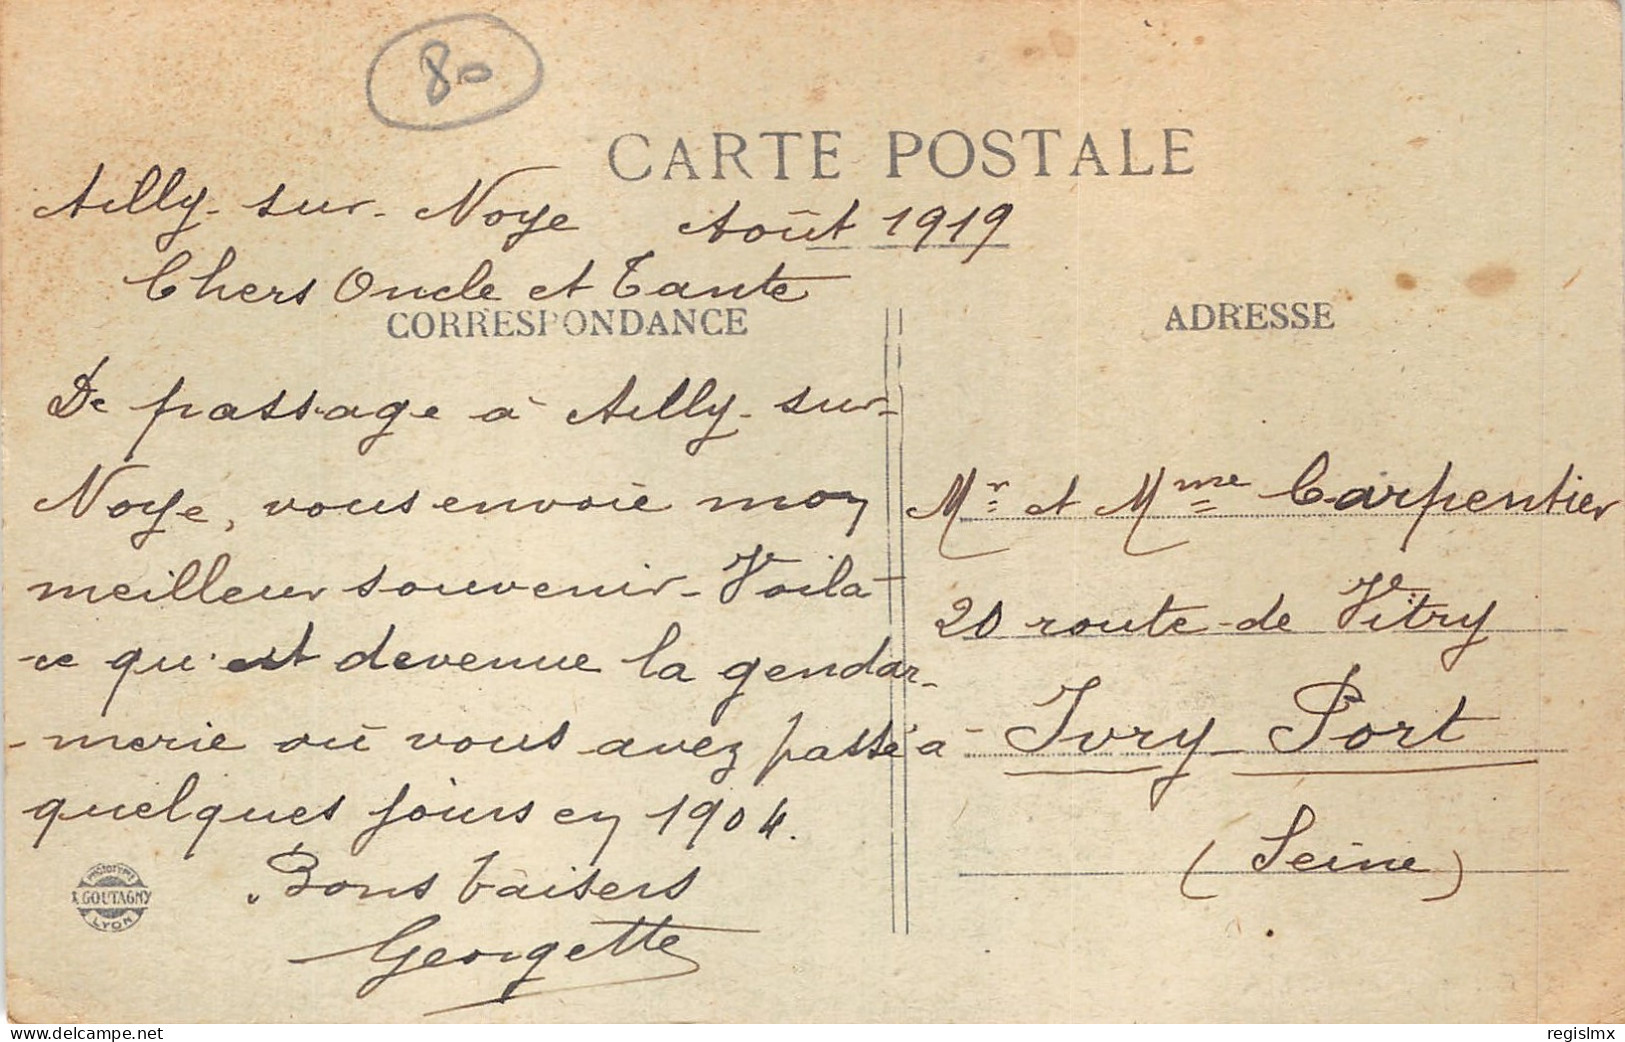 80-AILLY SUR NOYE-BOMBARDEMENT-N°T2407-C/0379 - Ailly Sur Noye